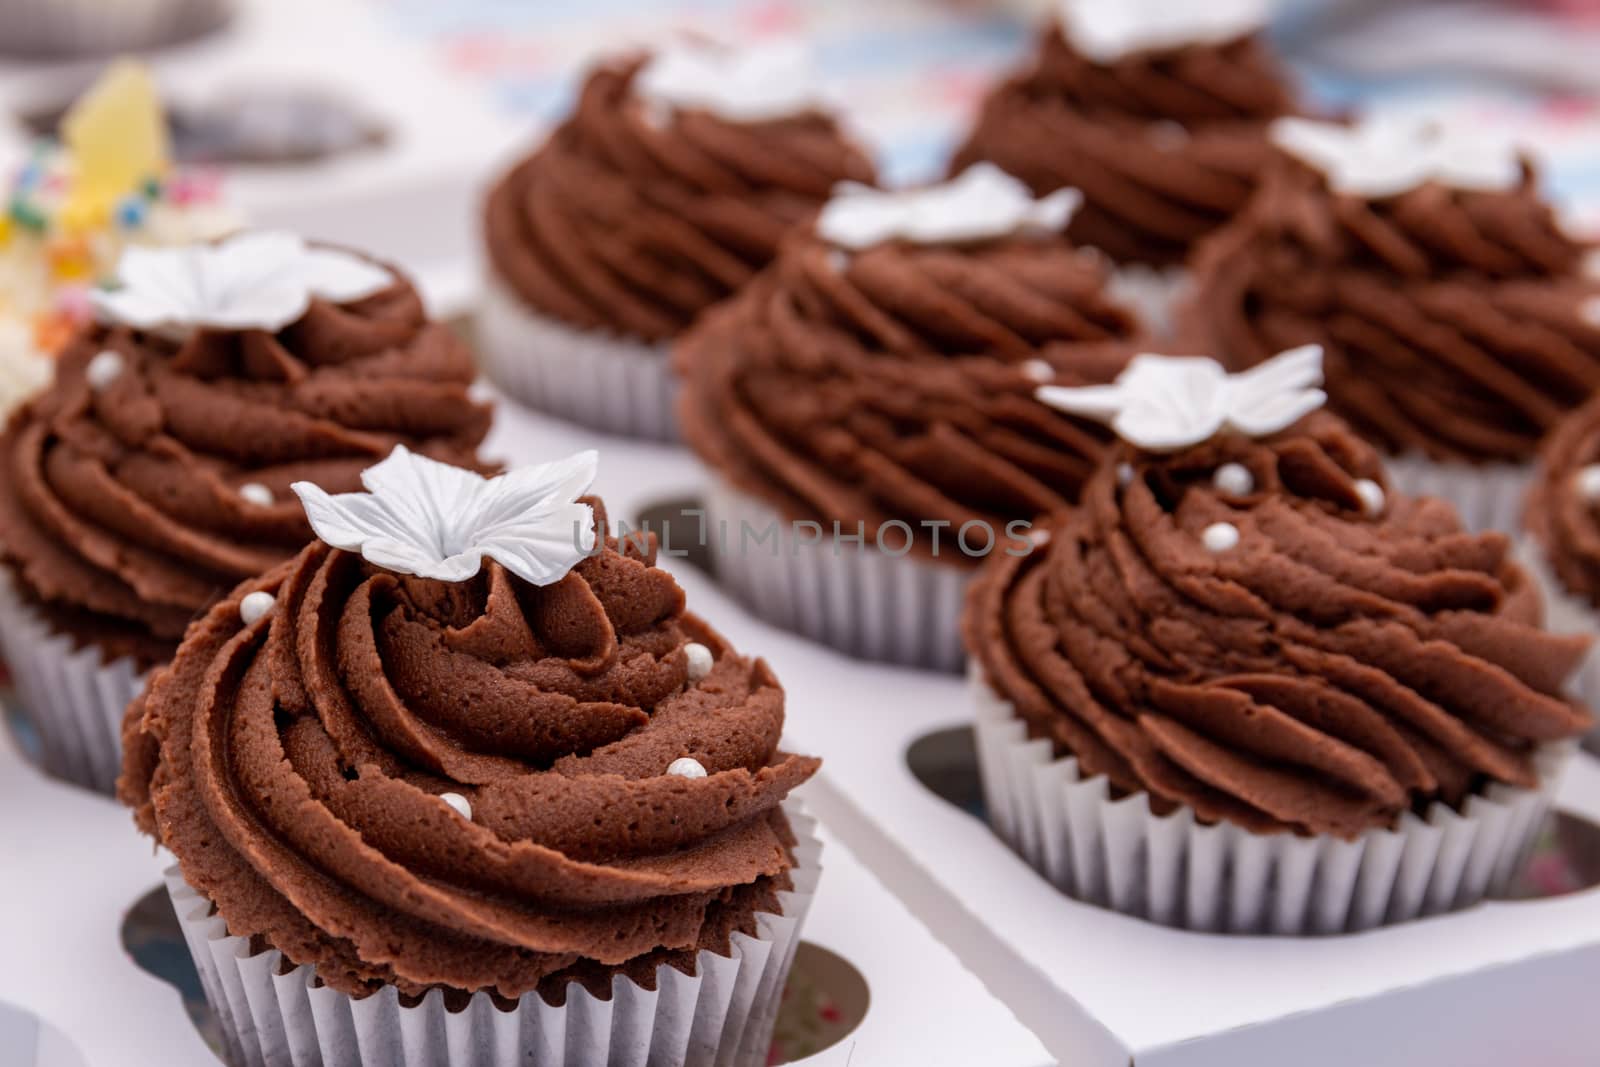 Homemade chocolate cupcakes on a market stall